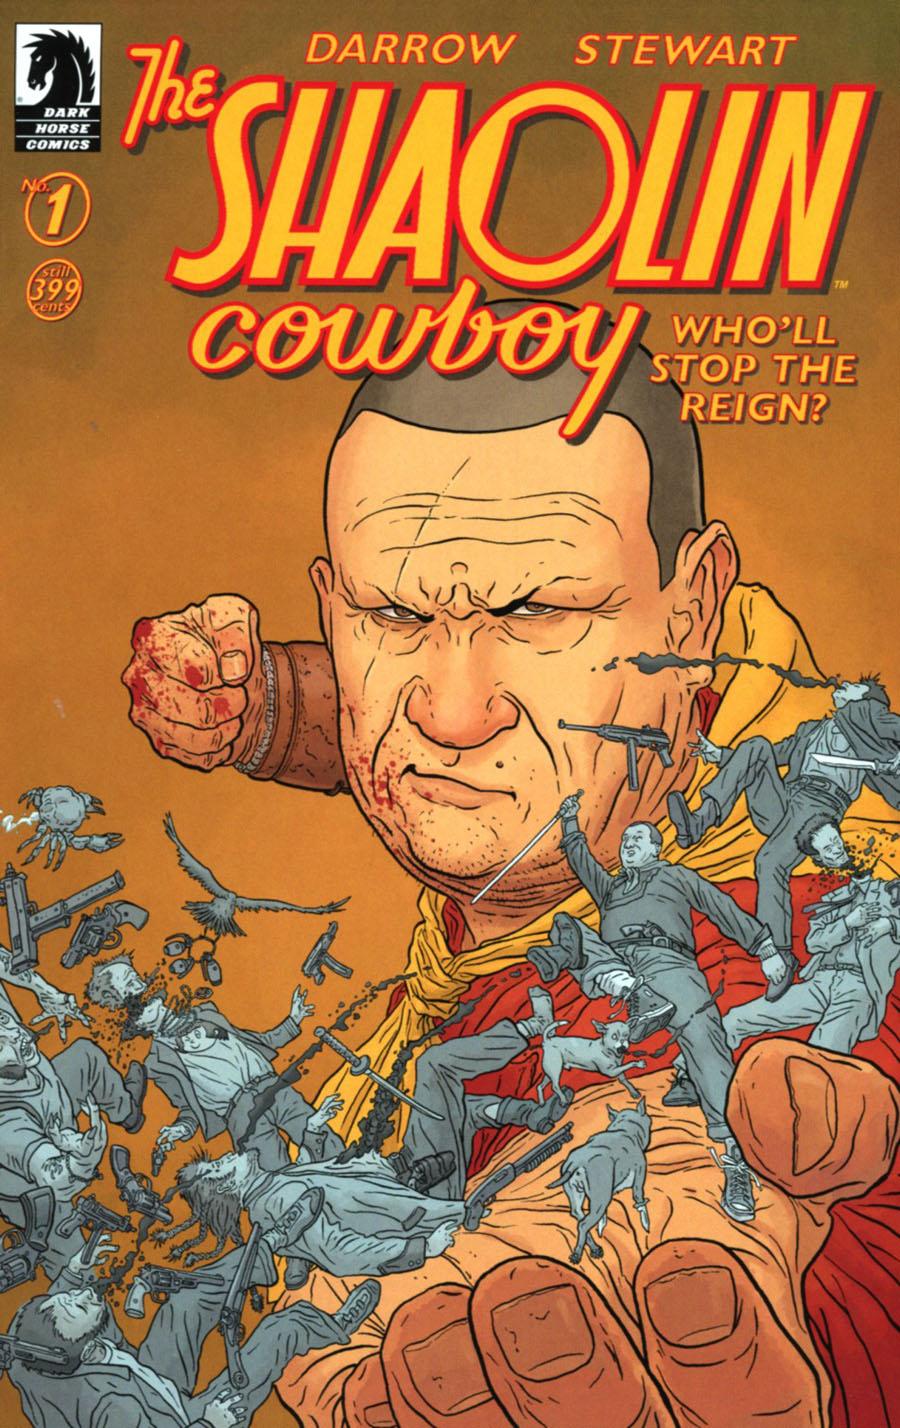 Shaolin Cowboy Wholl Stop The Reign Vol. 1 #1